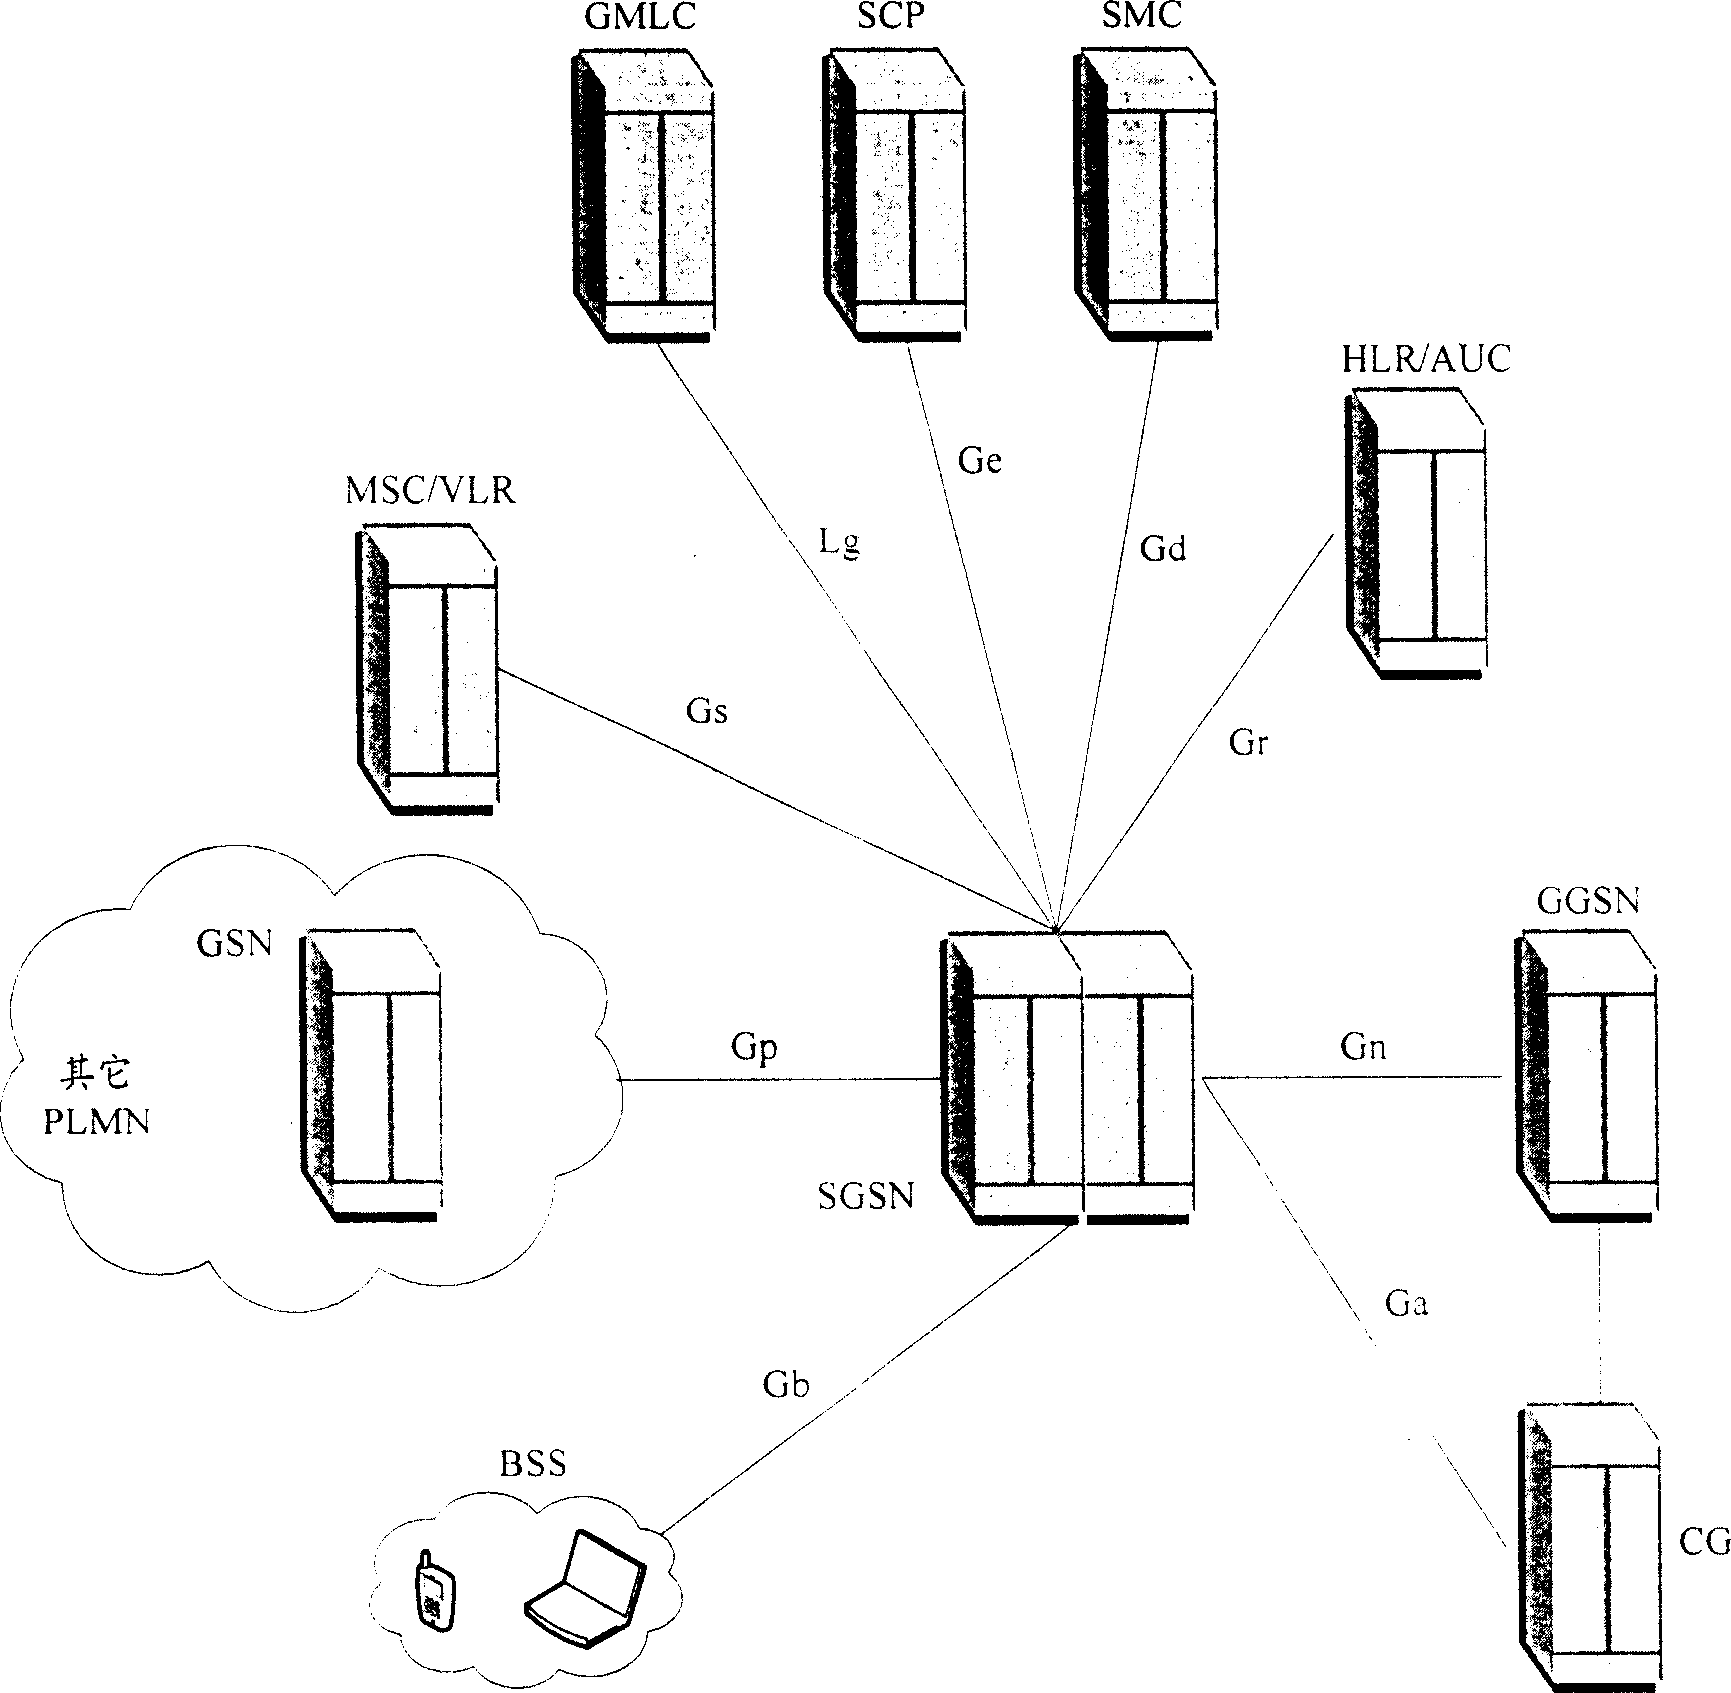 Method for supporting node route domain updation in universal wireless group service